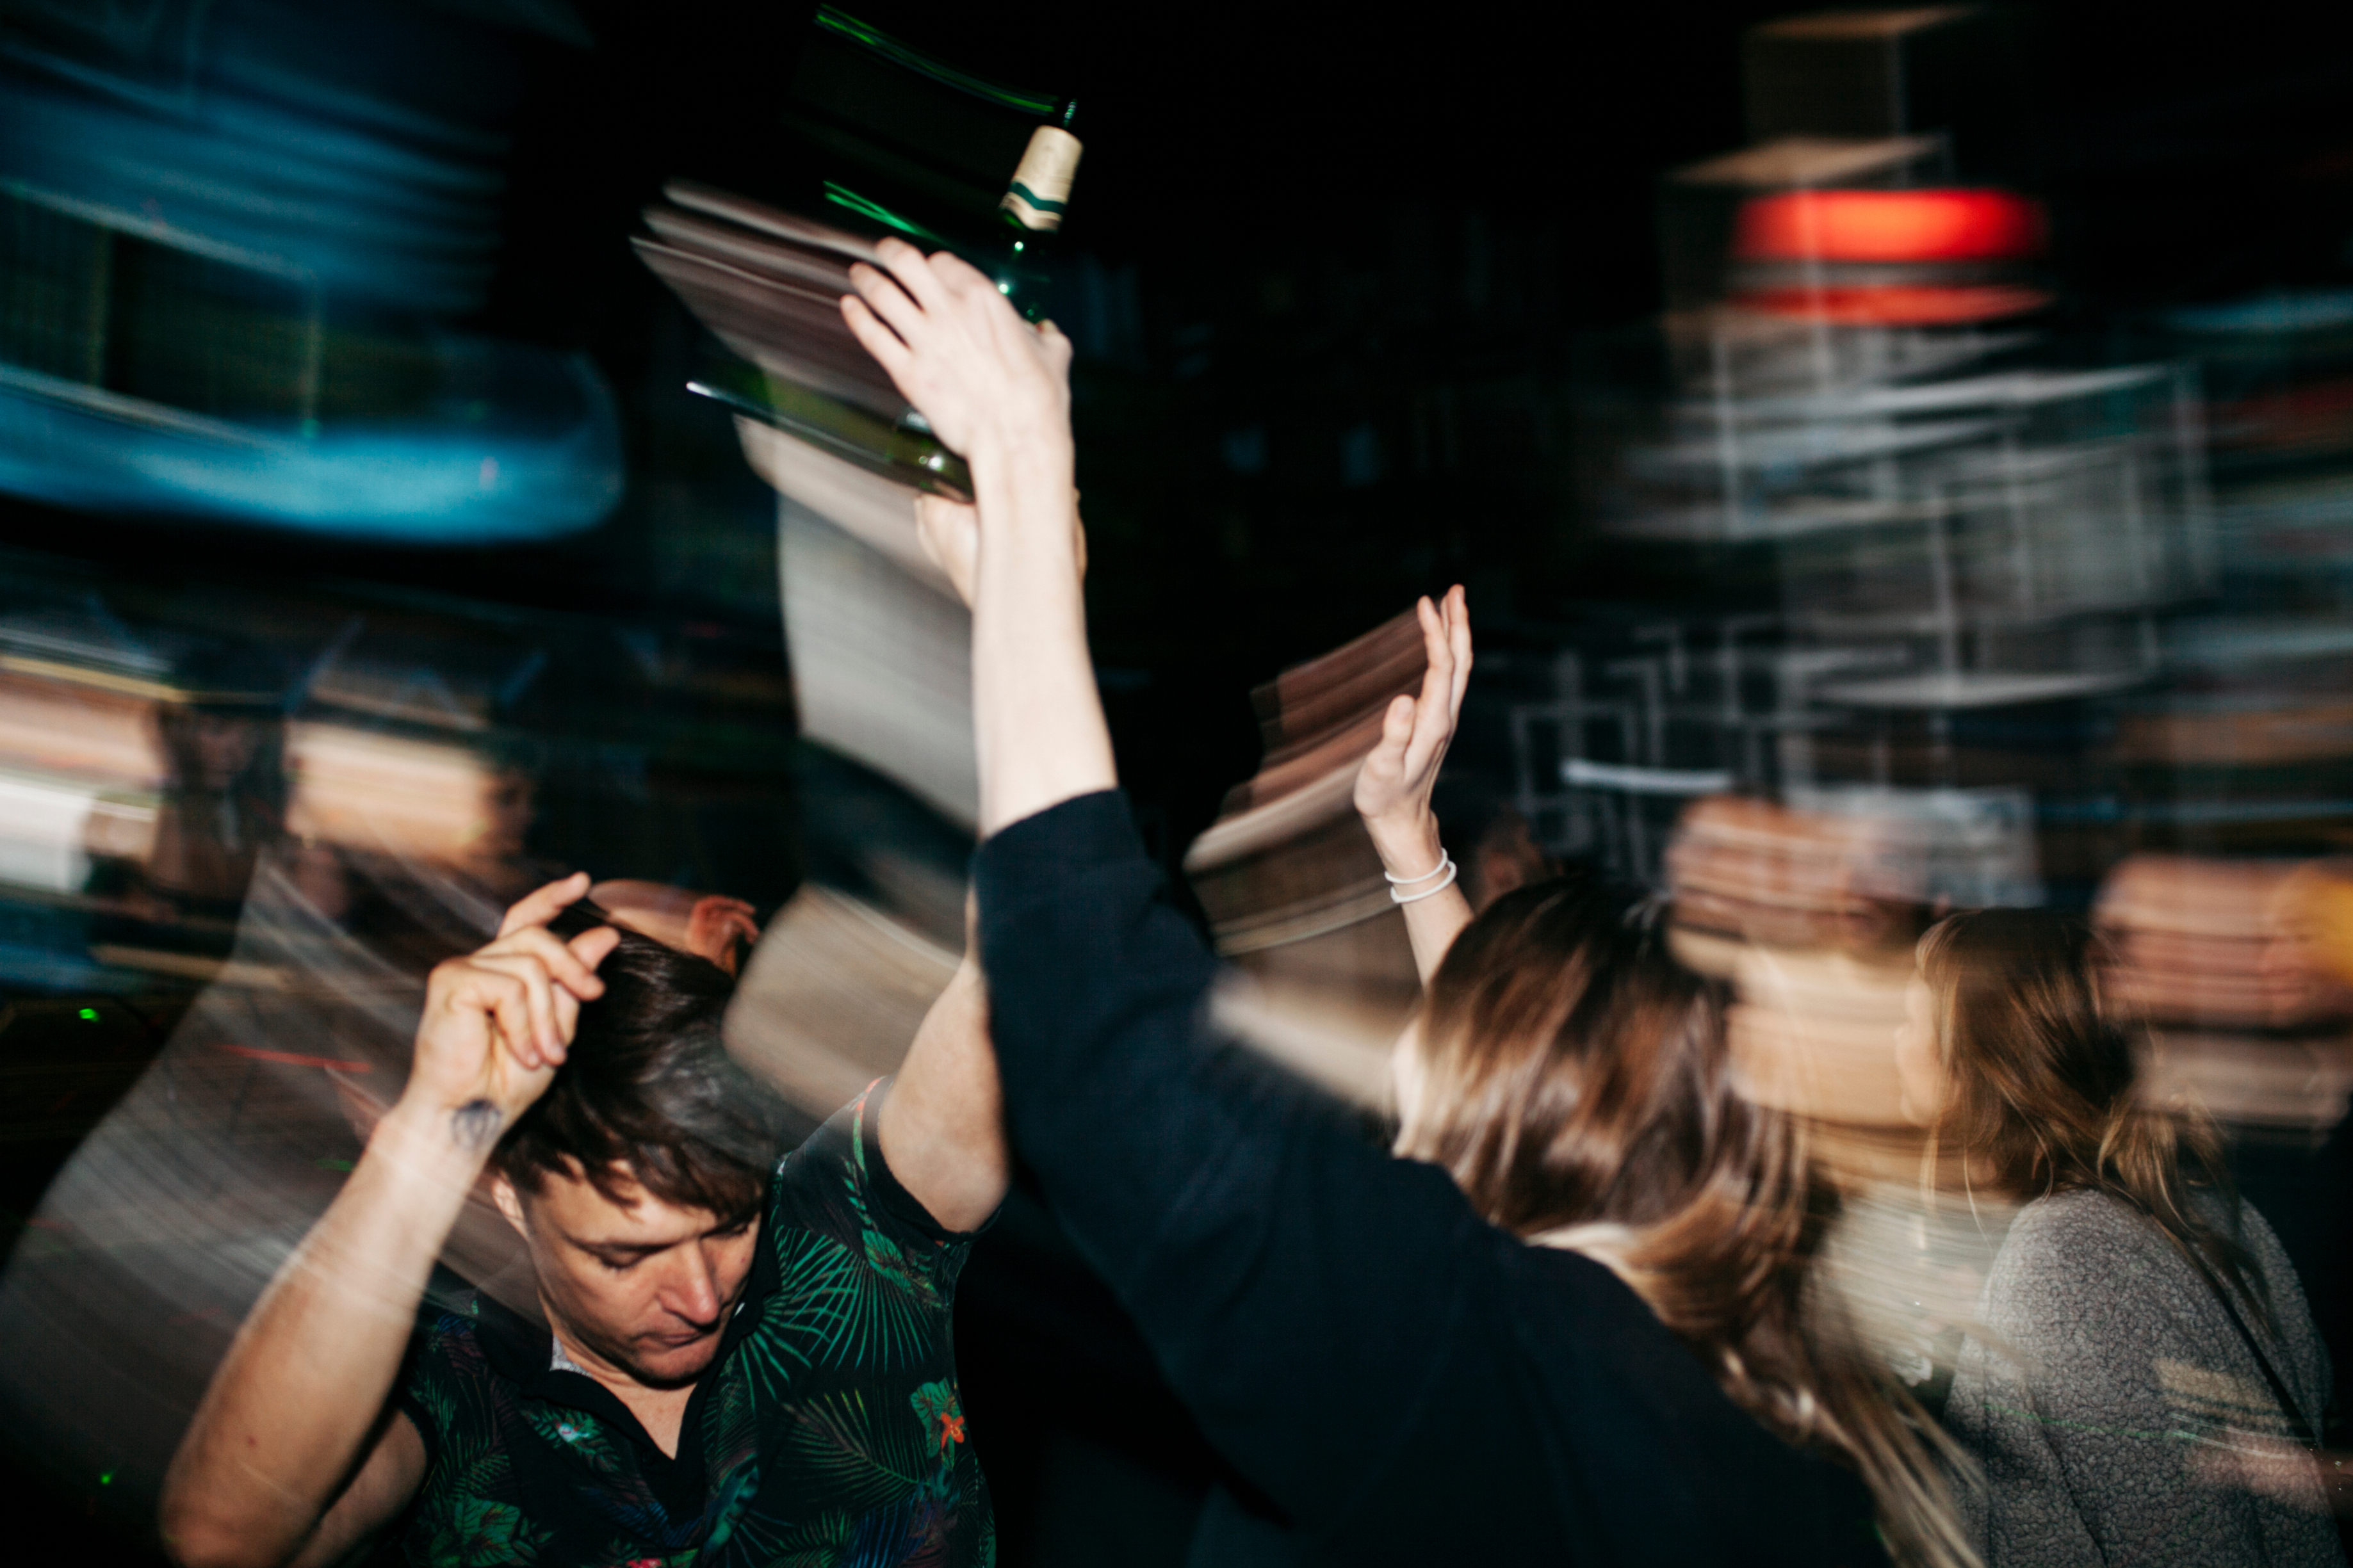 blurry to convey drunkenness; people dance in a crowded nightclub; one person has a bottle in their hands